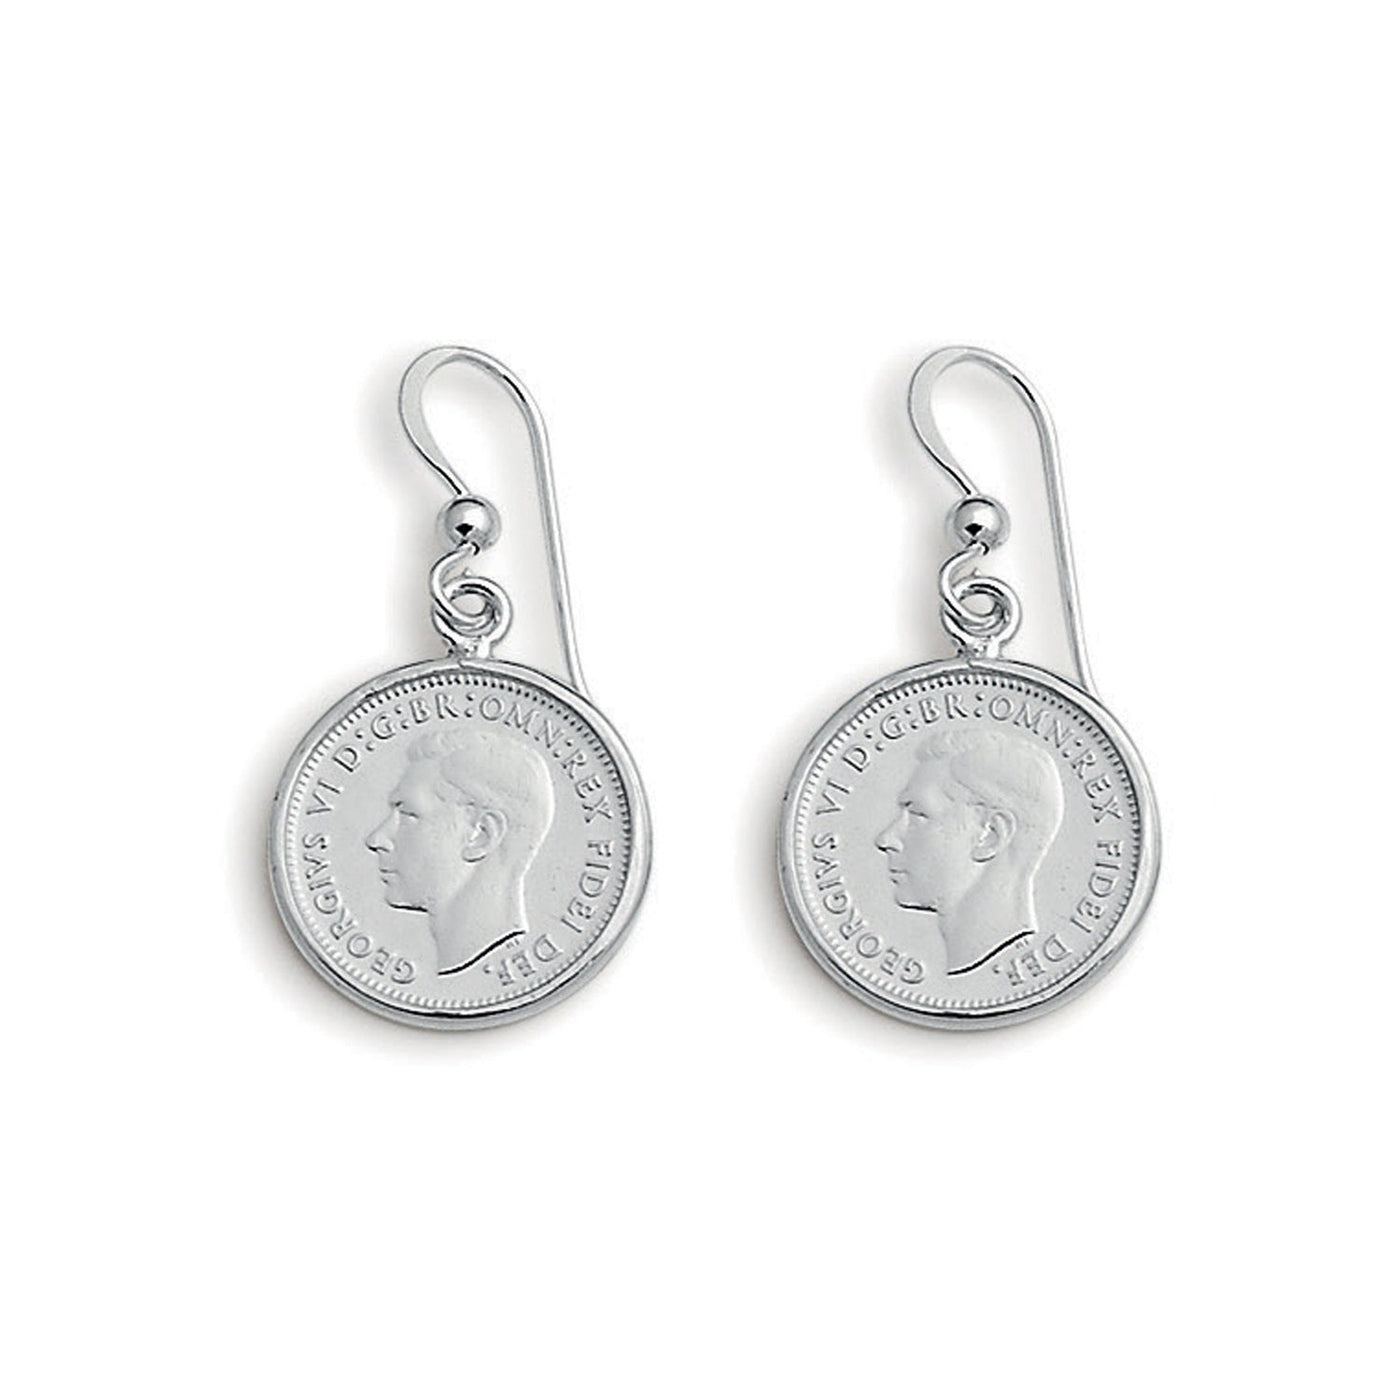 Von Treskow Silver Sixpence Earrings